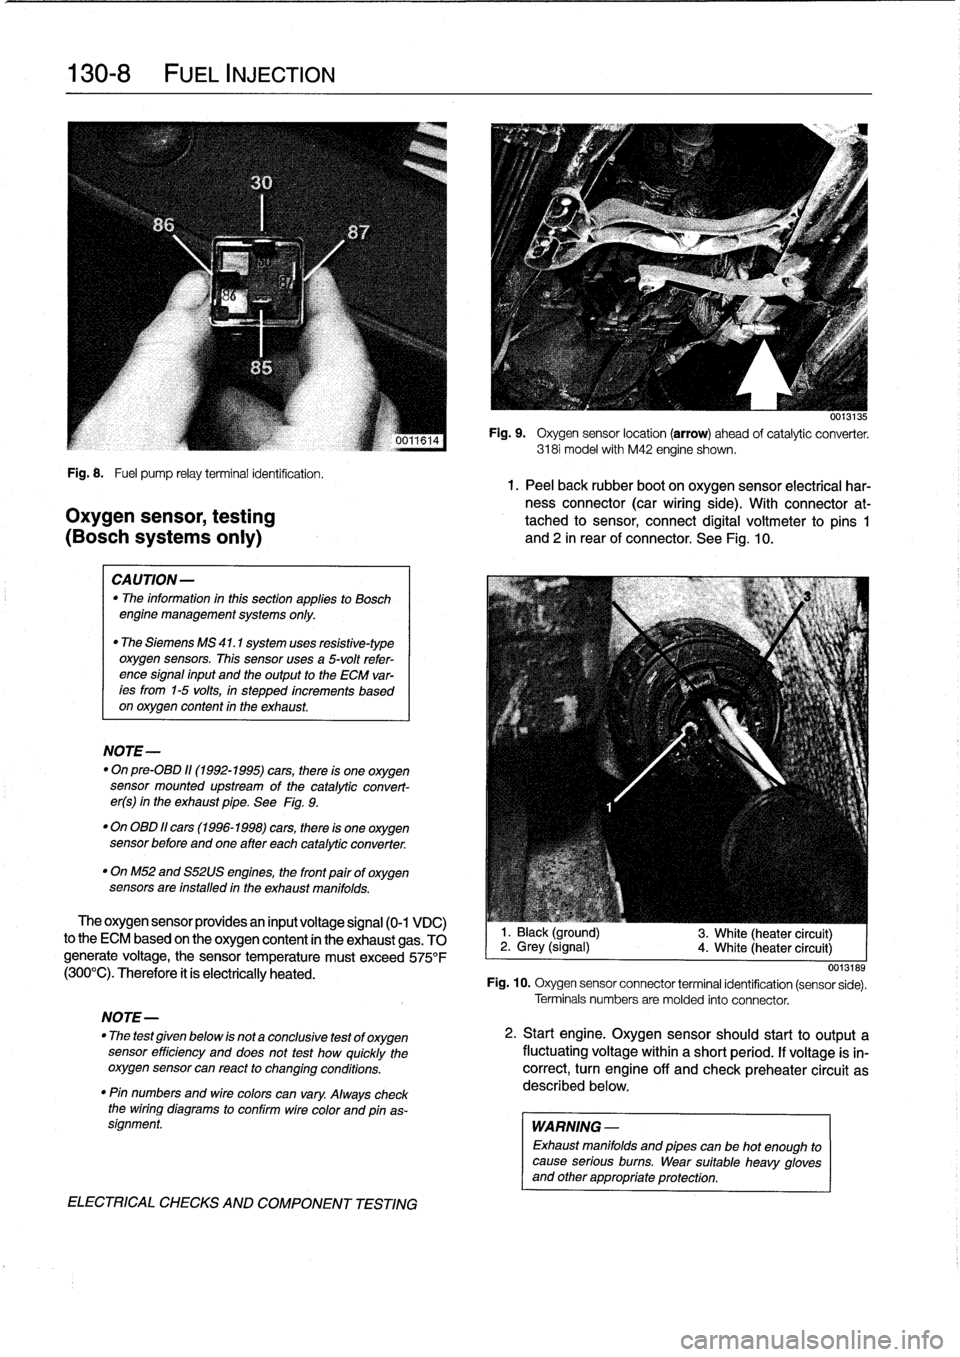 BMW 318i 1997 E36 Workshop Manual 
130-
8

	

FUEL
INJECTION

Fig
.
8
.

	

Fuel
pump
relayterminal
identification
.
1.
Peel
back
rubber
boot
on
oxygen
sensor
electrical
har-
ness
connector
(car
wiring
side)
.
With
connector
at-
Oxyge